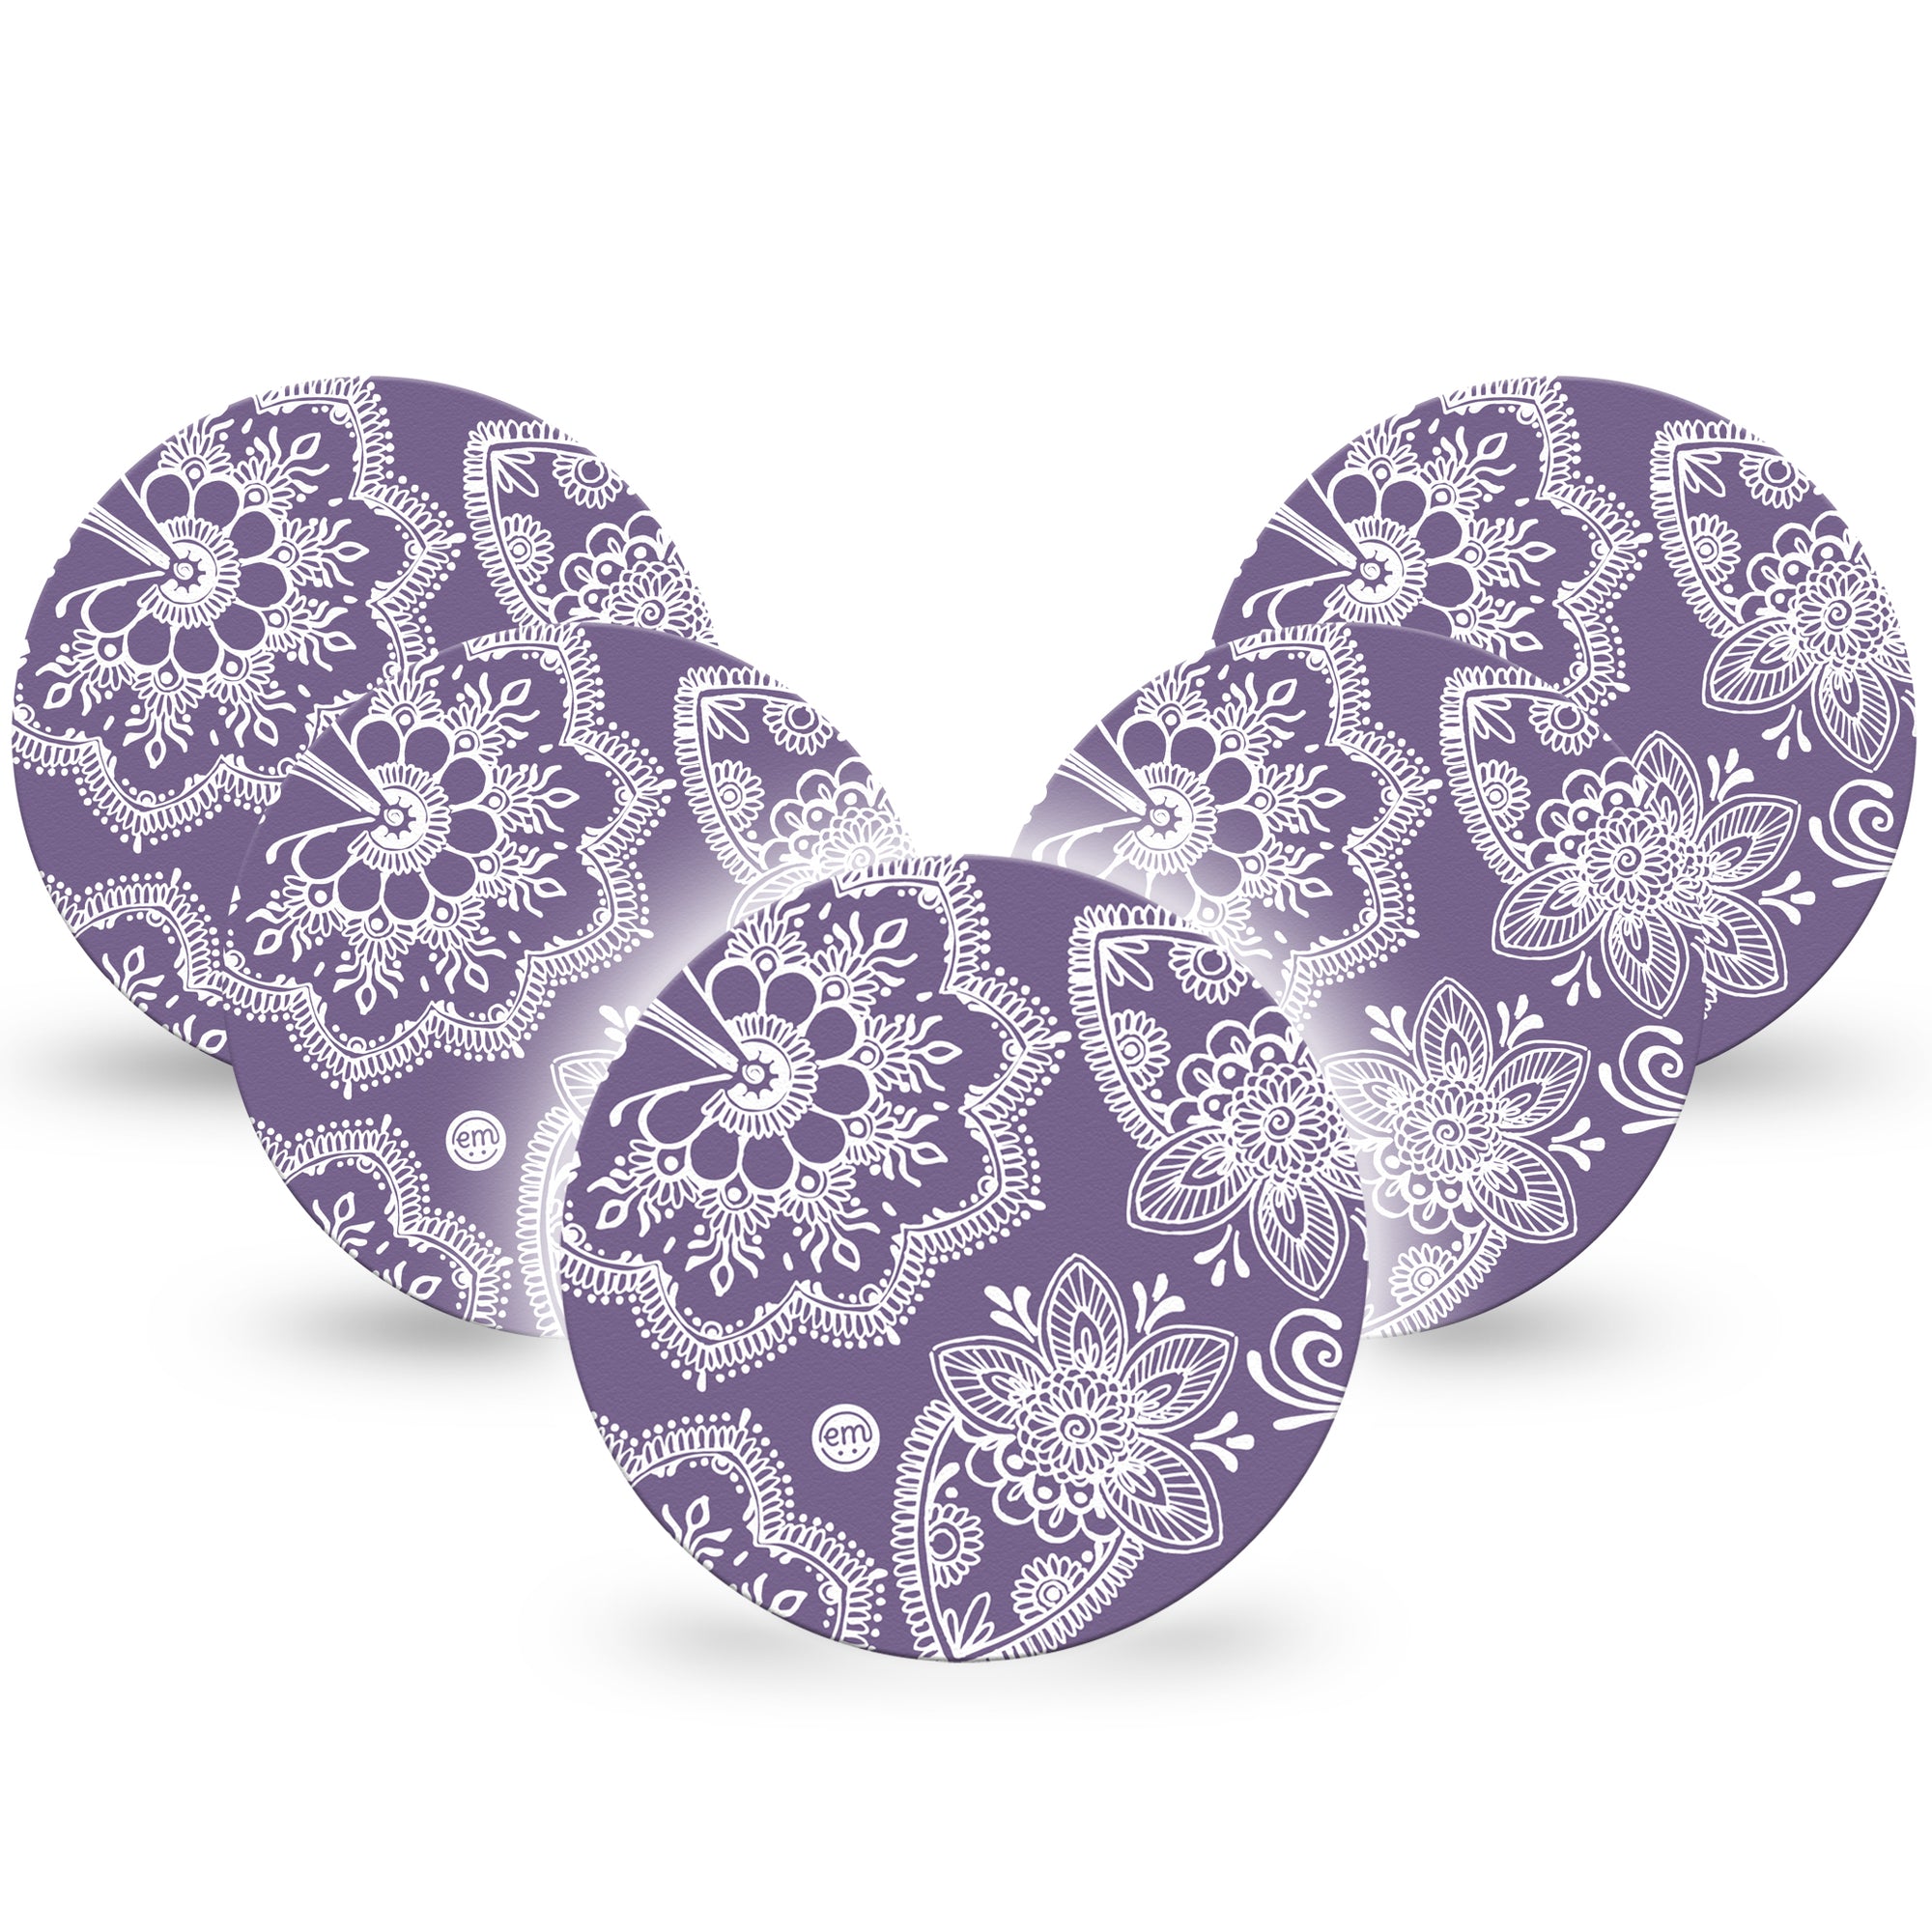 ExpressionMed Purple Henna Libre Tapes